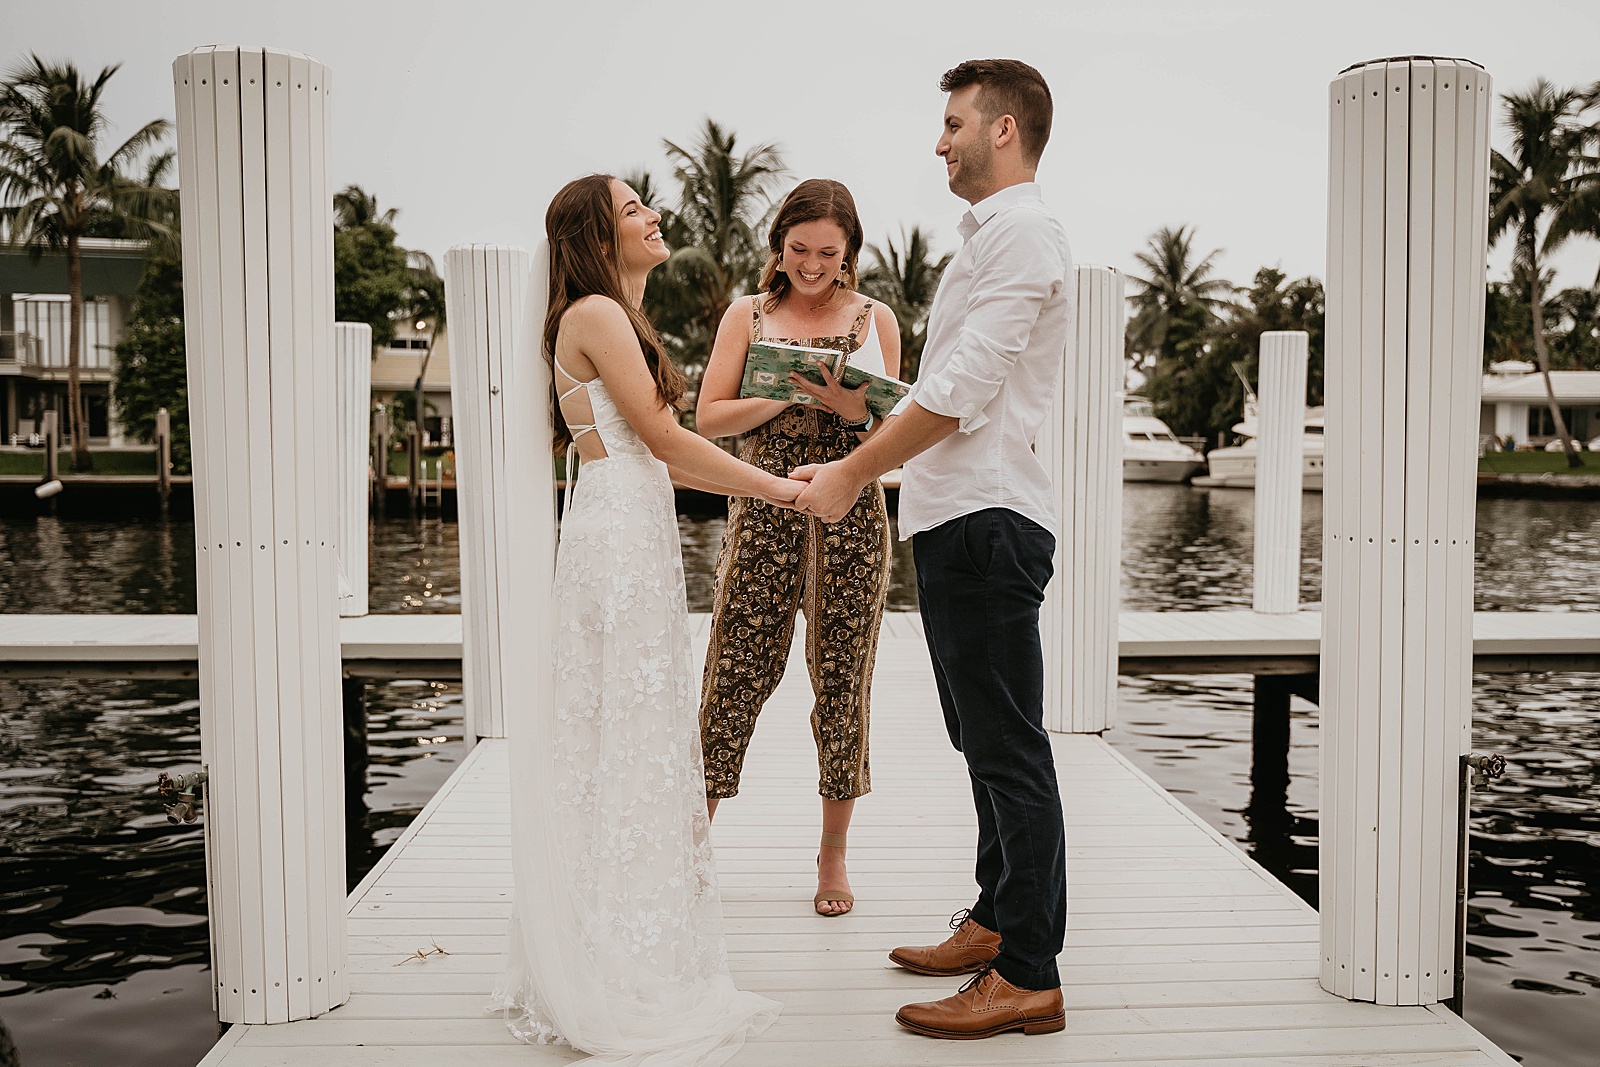 Intimate Fort Lauderdale Elopement Ceremony captured by South Florida Elopement Photographer, Krystal Capone Photography